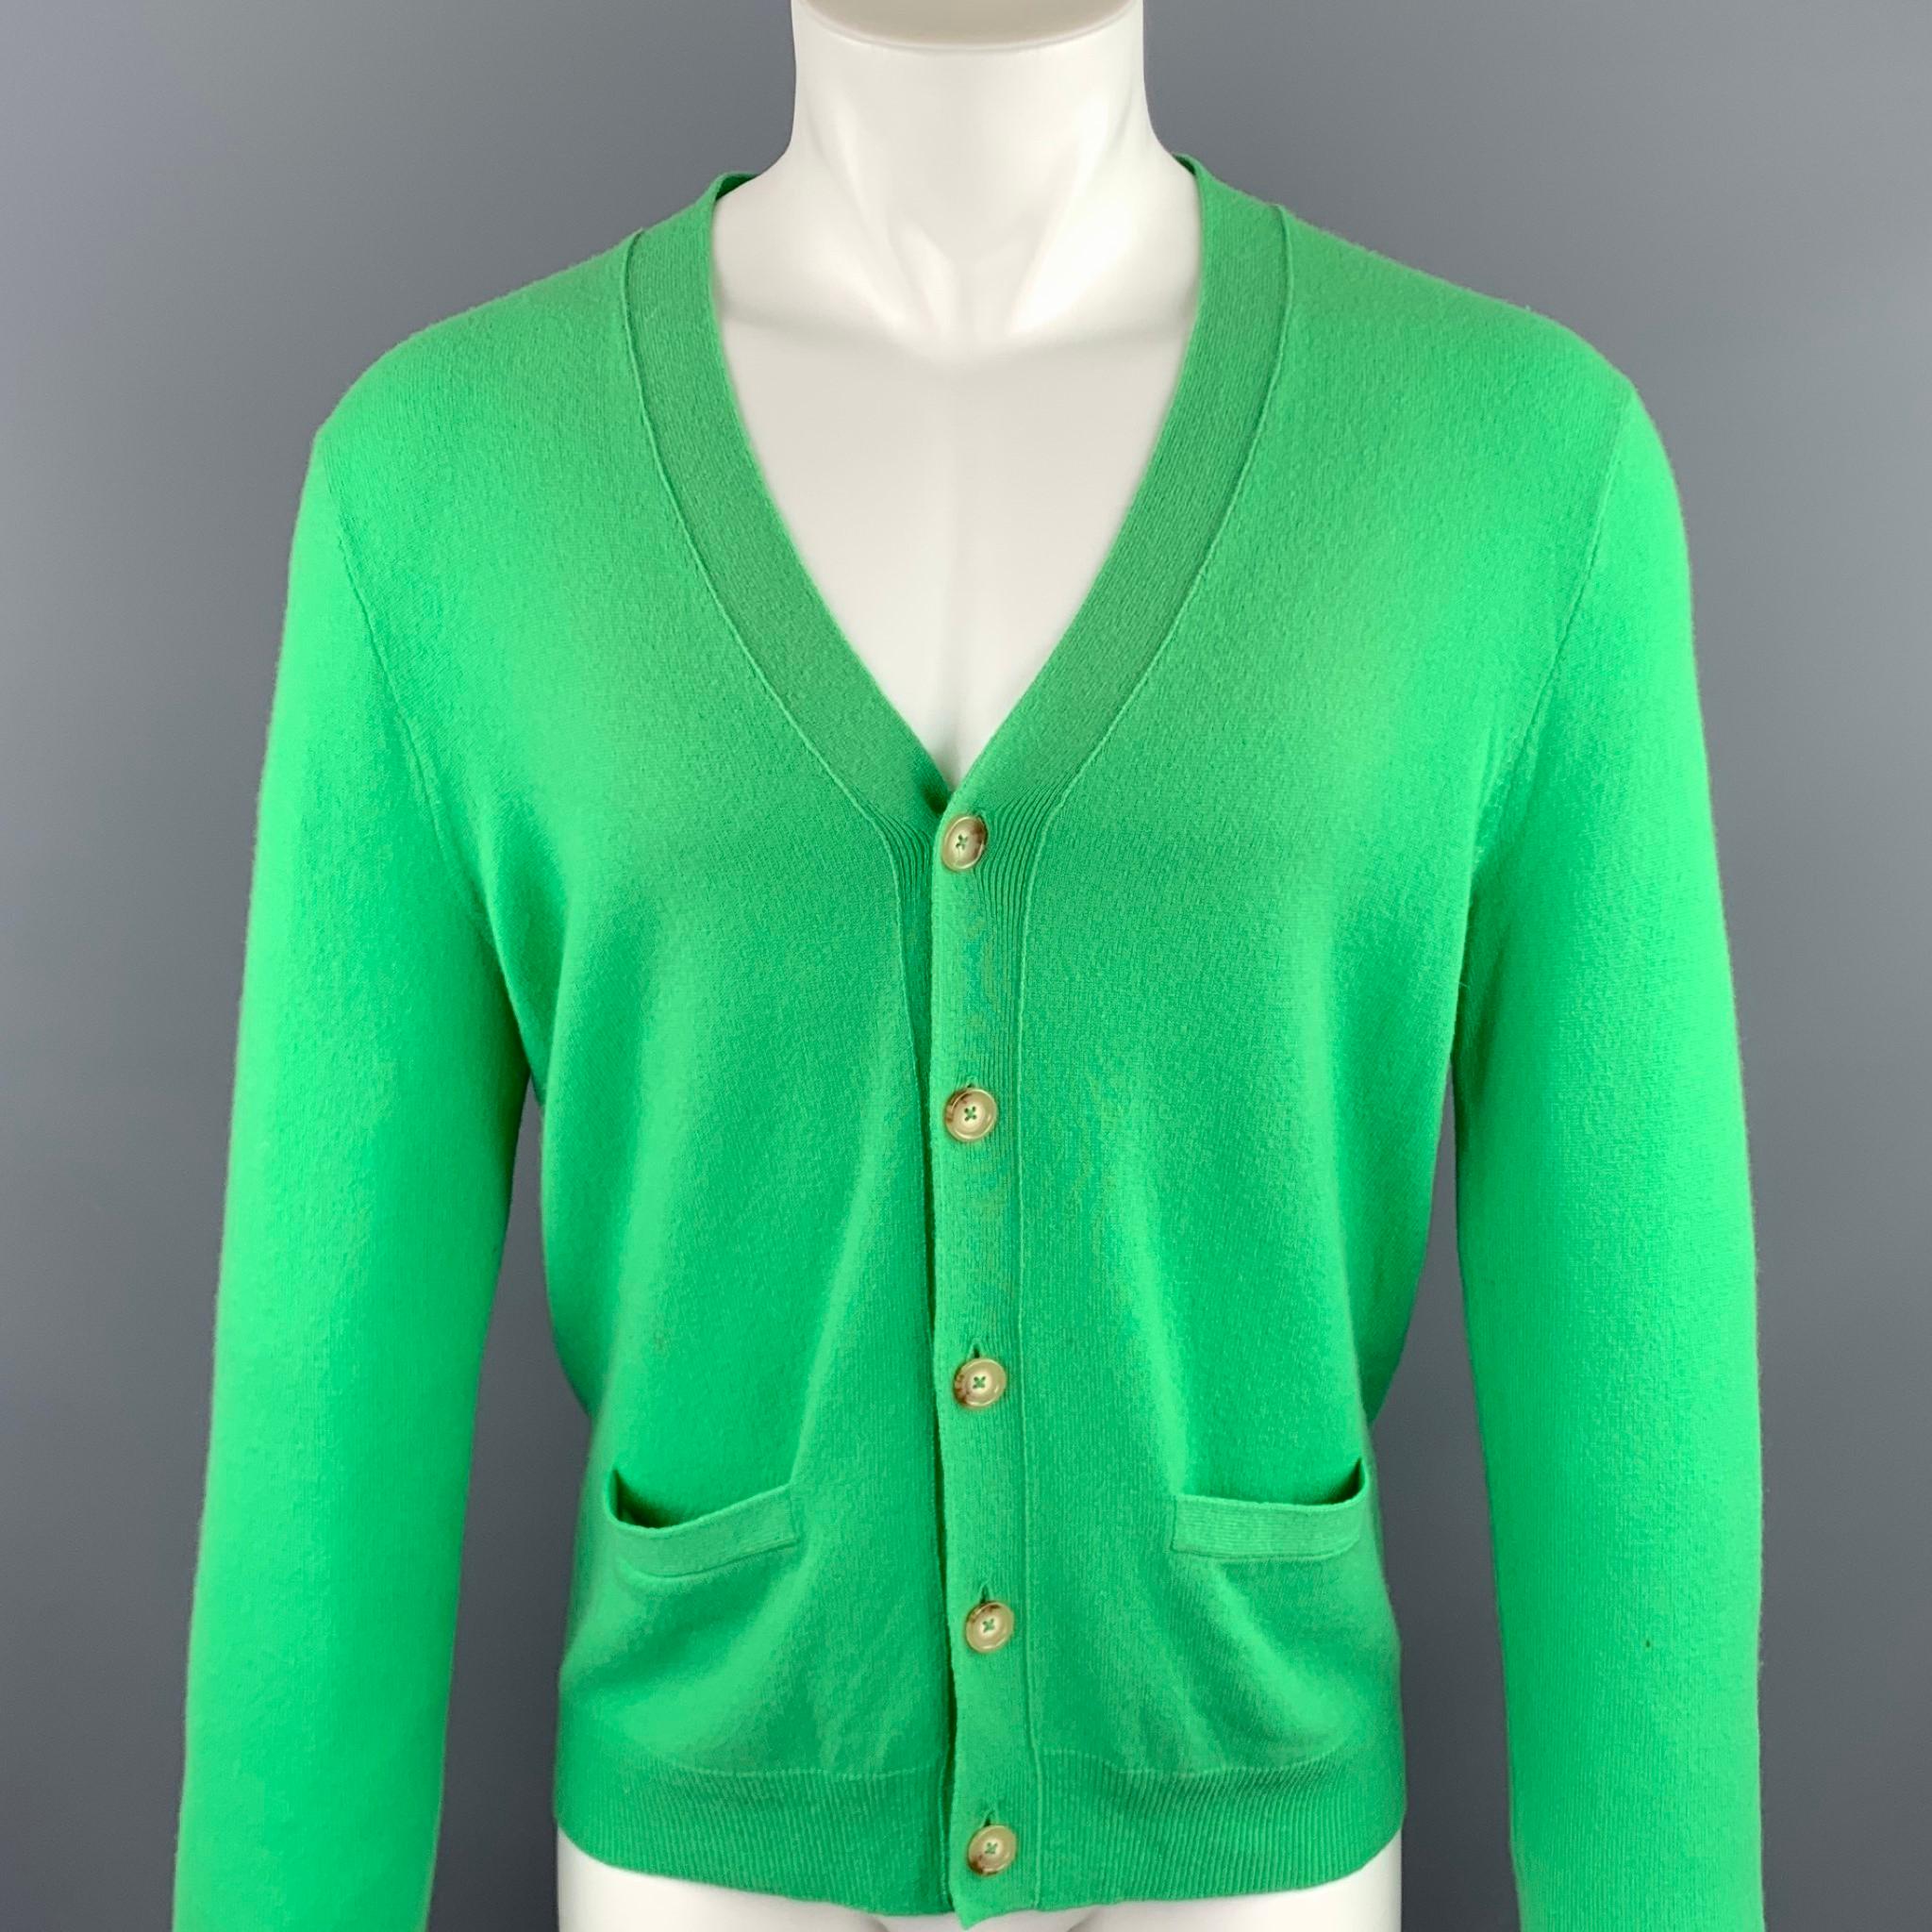 RALPH LAUREN cardigan green cashmere featuring slit pockets and a buttoned closure.

New With Tags.
Marked: S
Original Retail Price: $425.00

Measurements:

Shoulder: 16.5 in.
Chest: 38 in.
Sleeve: 26.5 in.
Length: 25.5 in.  